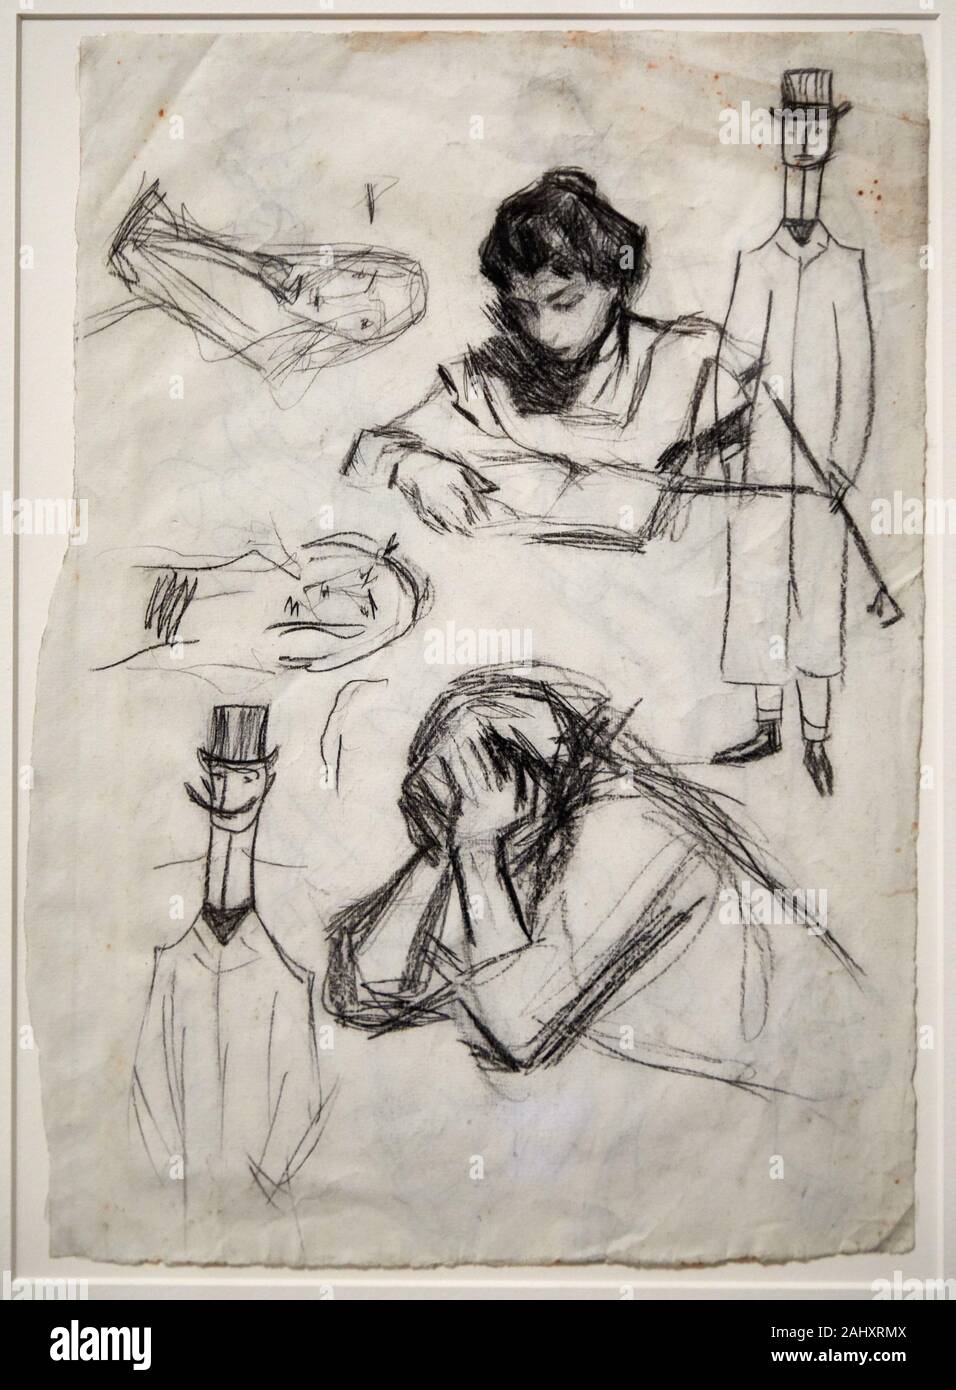 '''Lola, the artist’s sister, study for ¡Pobres genios! another sketches'', 1899, Pablo Picasso (1881-1973), Museu Picasso Museum, Barcelona, Stock Photo